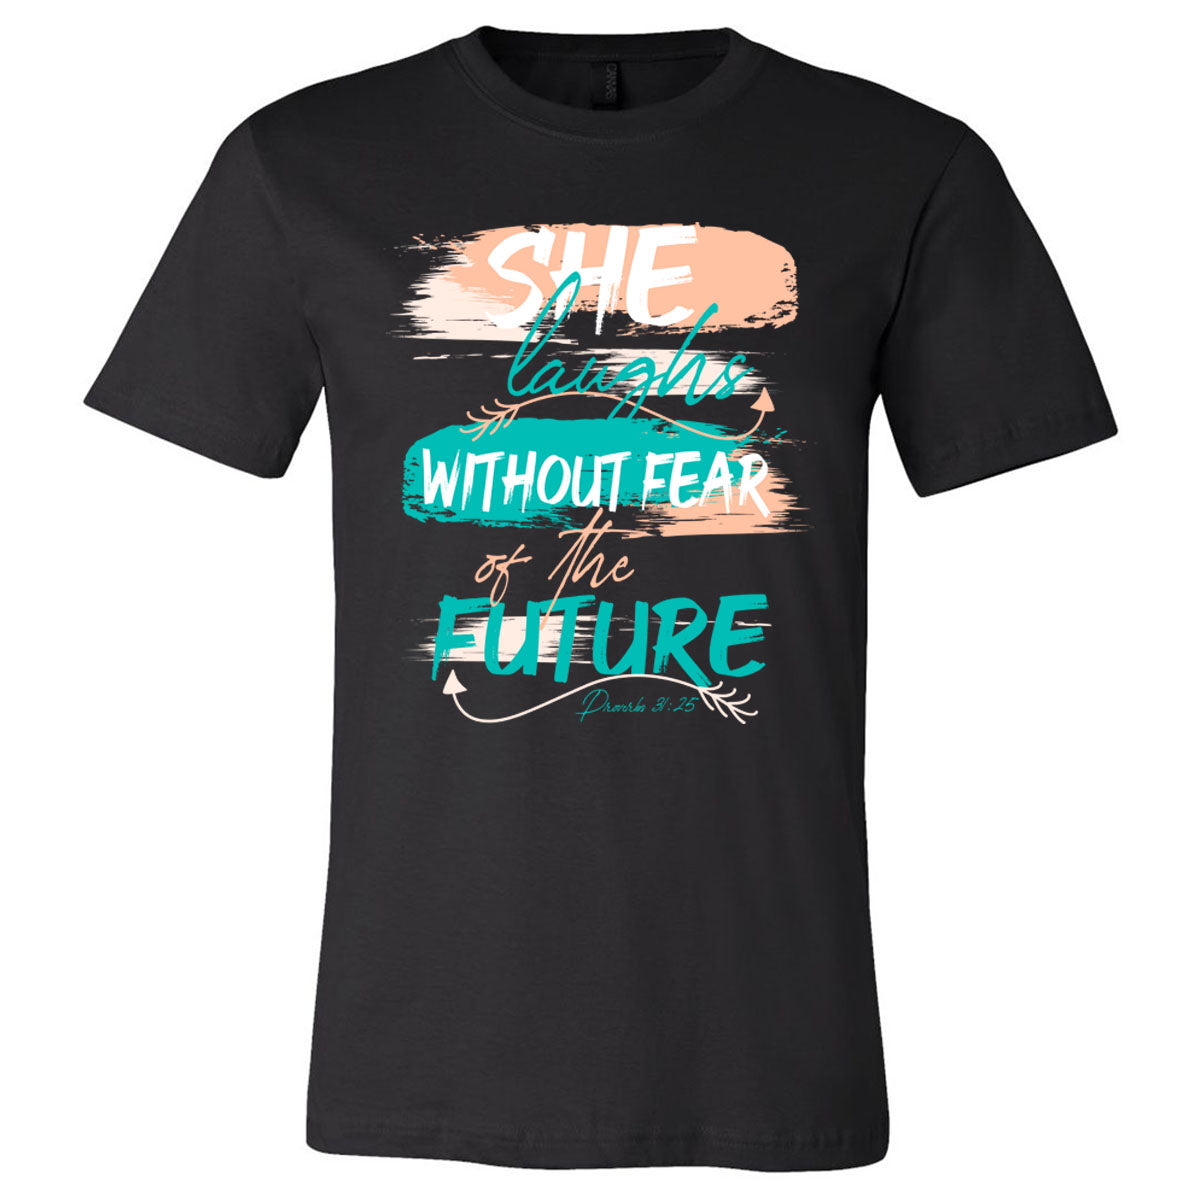 She Laughs Without Fear of the Future - Black Short Sleeves Tee - Southern Grace Creations